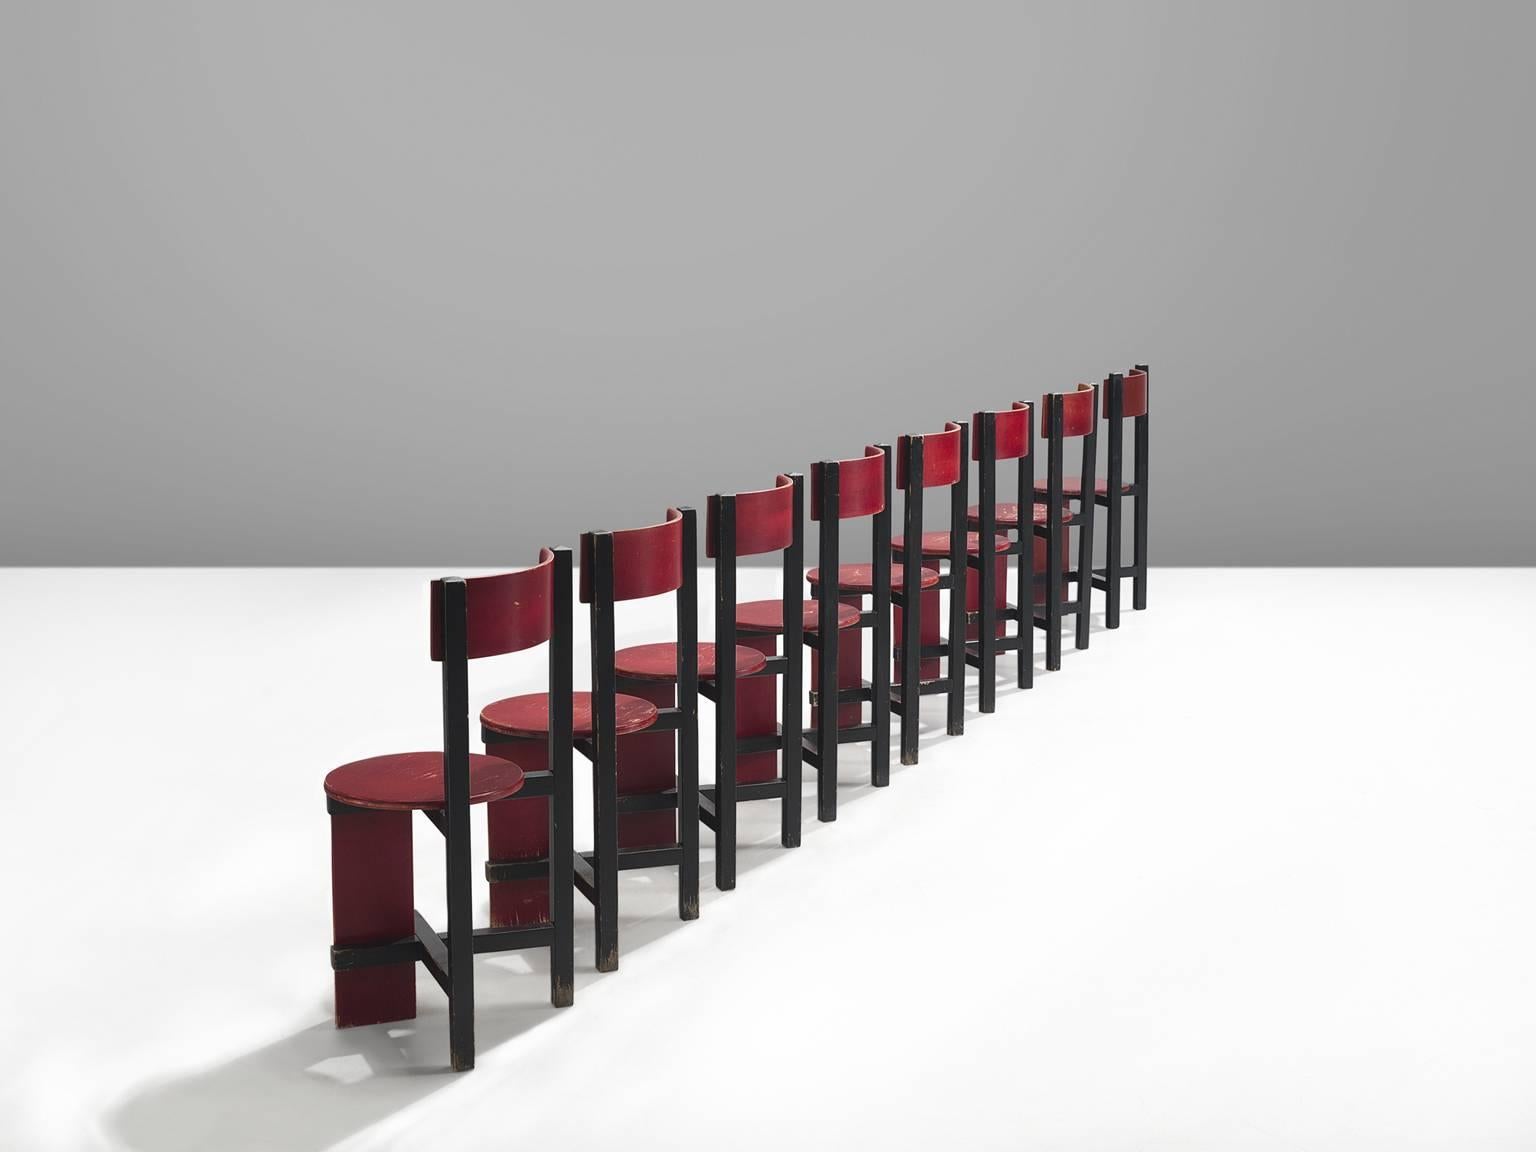 Rare set of eight 'Bastille' chairs, in lacquered wood, by Piet Blom, the Netherlands 1968.

This sculptural set was originally designed for the University of Twente which was nicknamed the 'Bastille'. The chairs were designed in 1968 and only